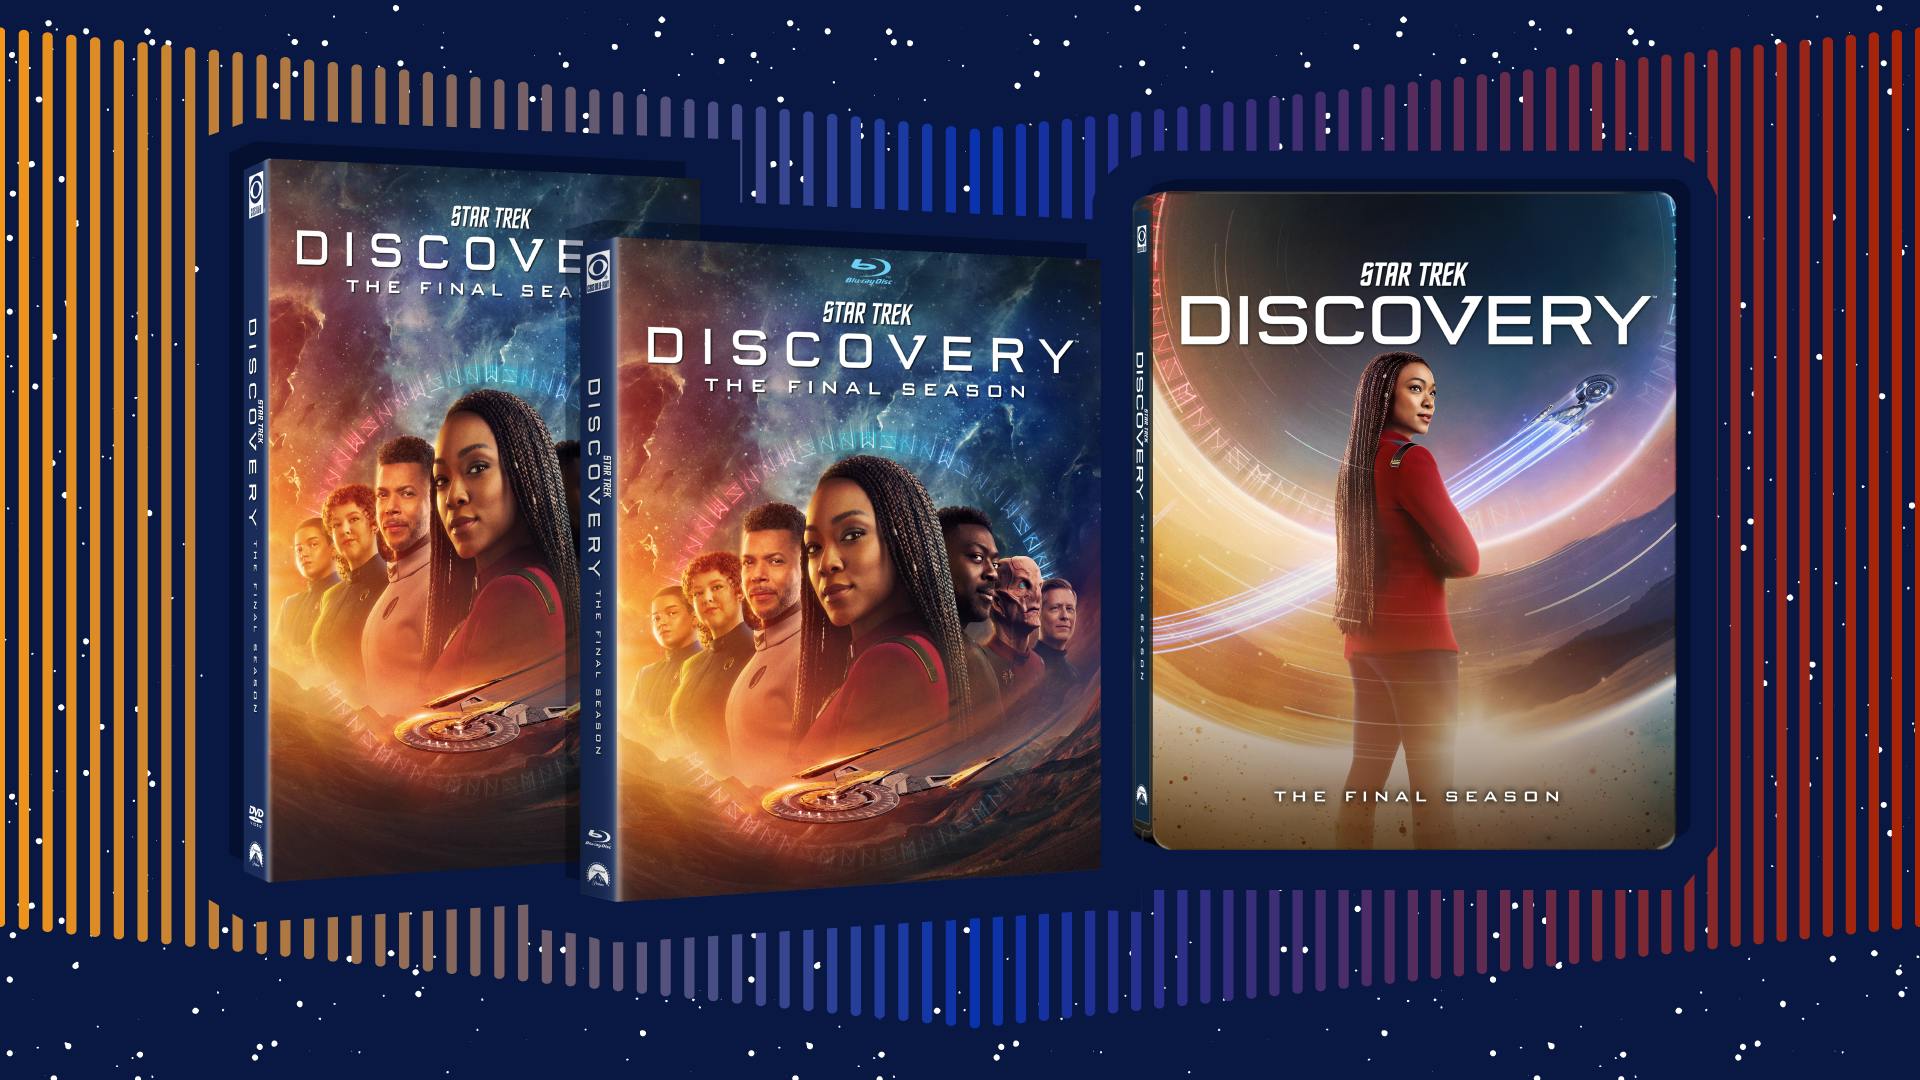 Packshots of Star Trek: Discovery - The Final Season in Blu-ray, DVD, and Limited Edition Steelbook